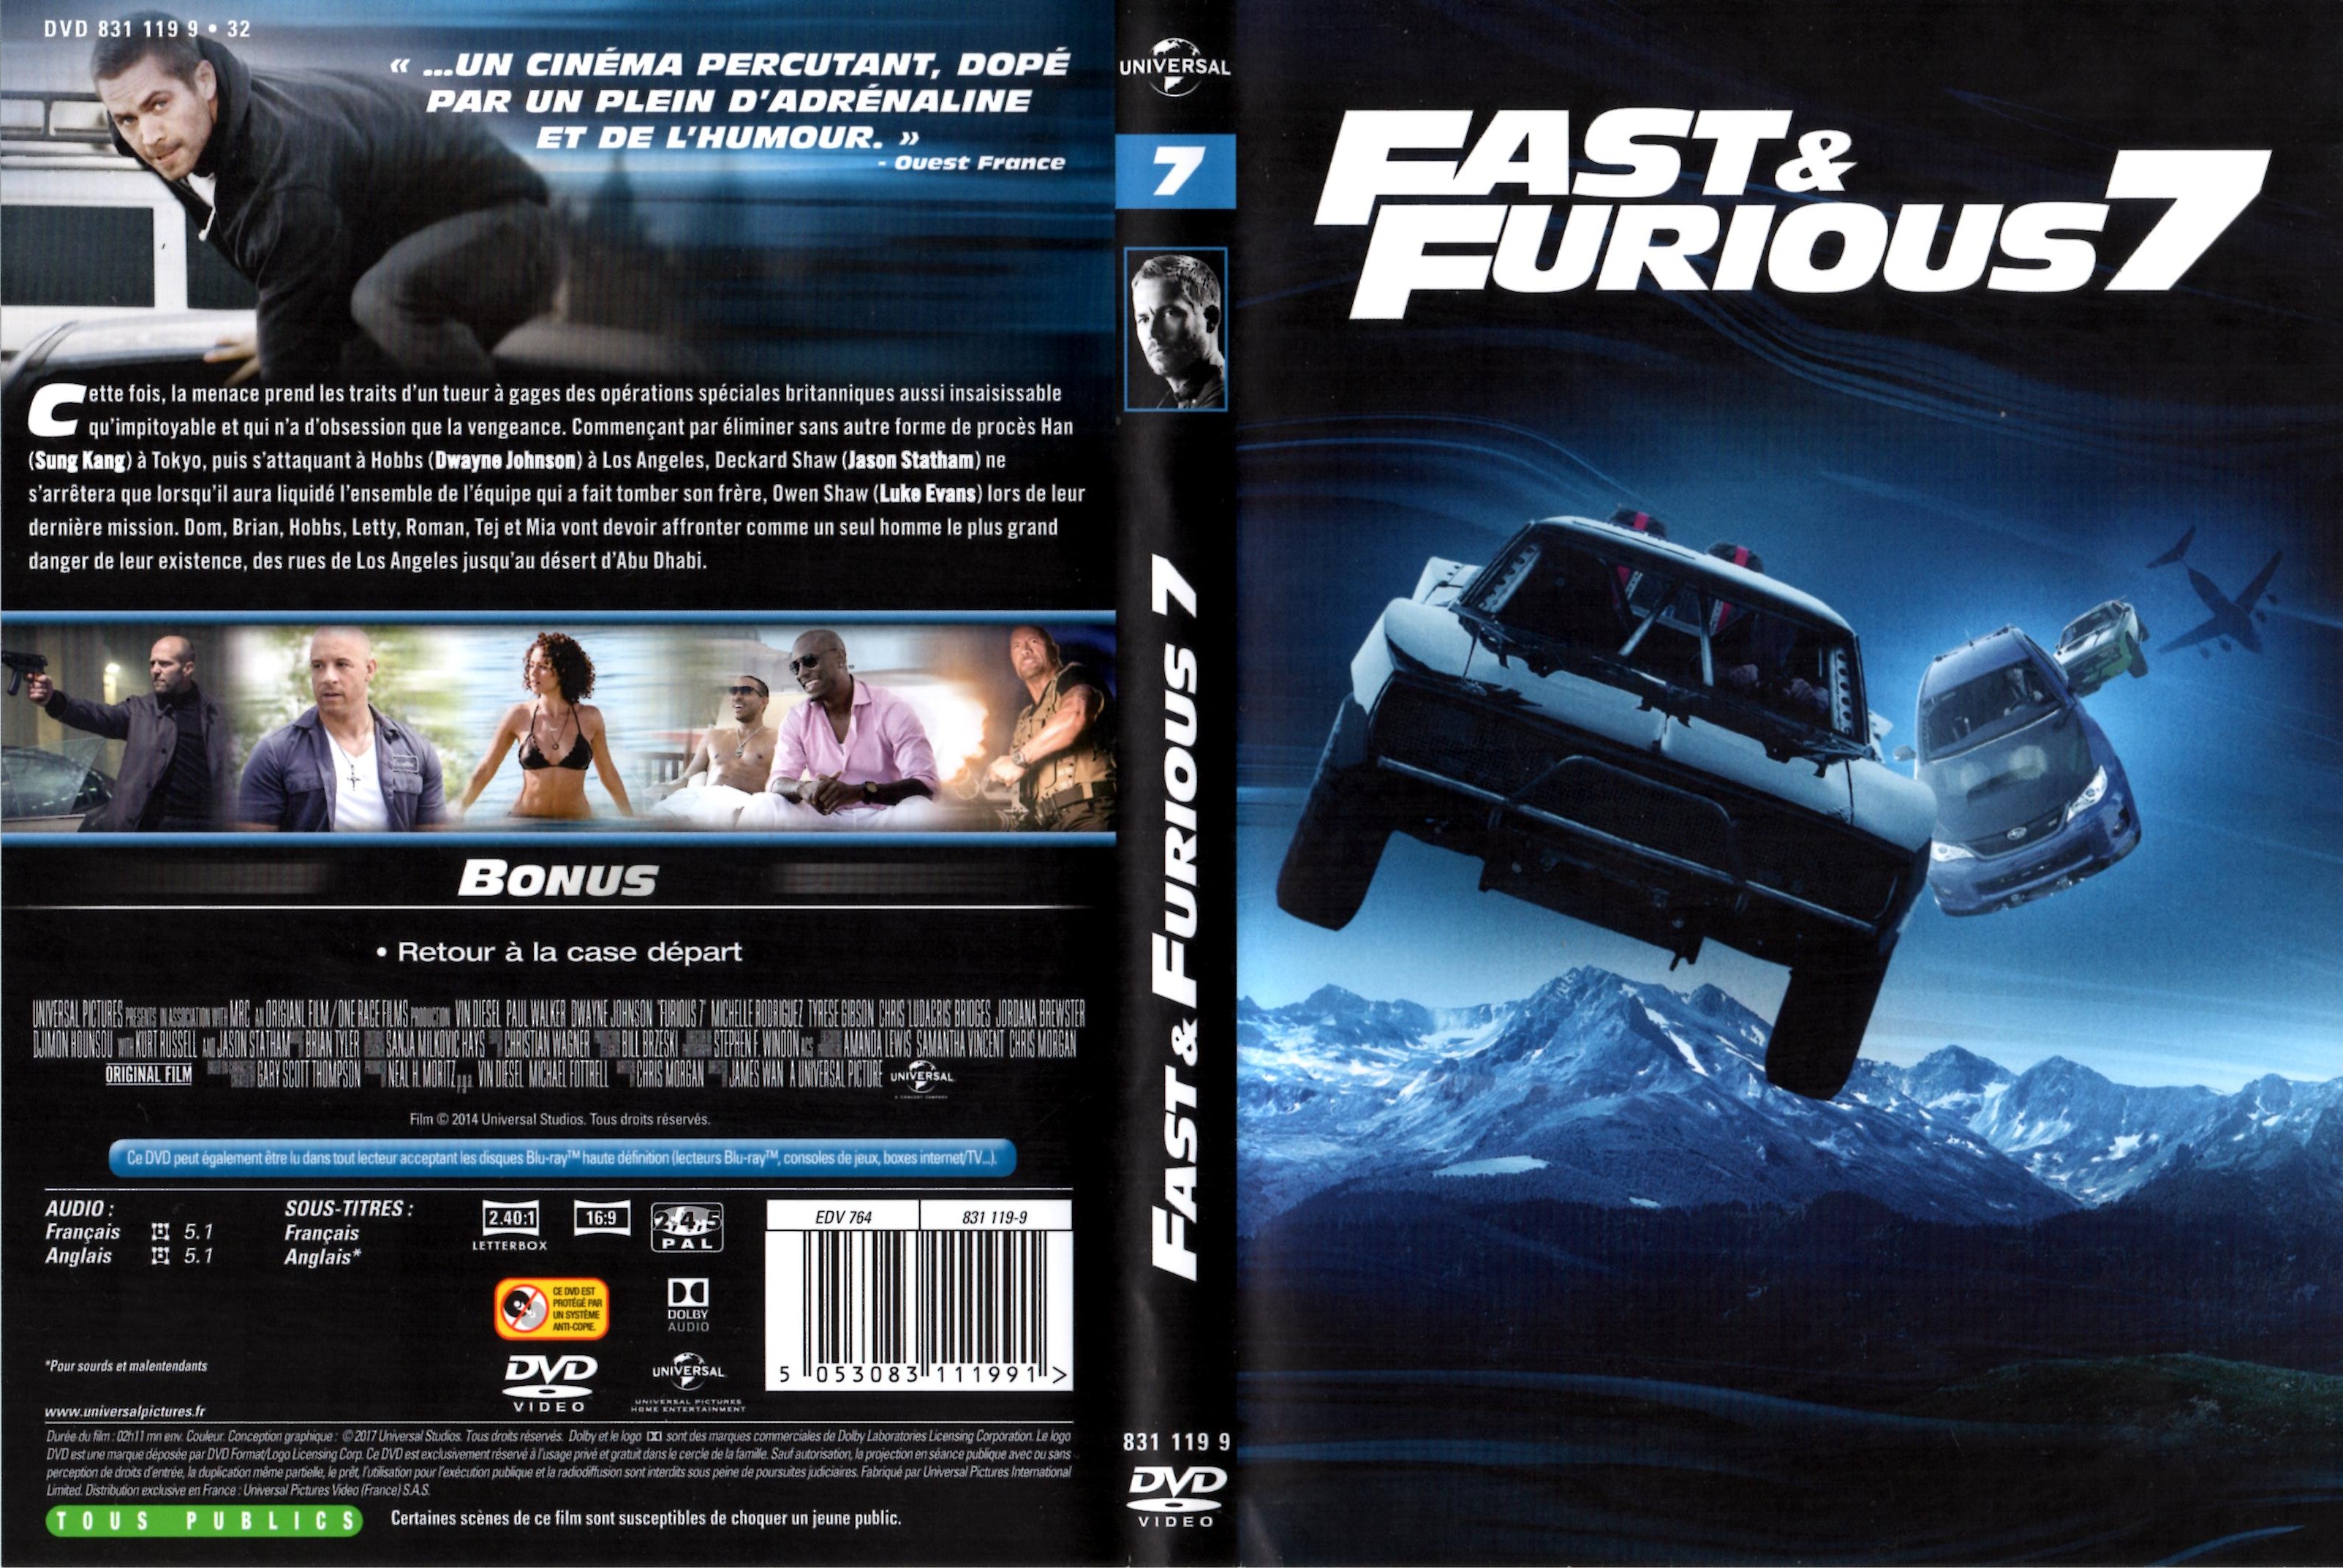 Jaquette DVD Fast & Furious 7 v2